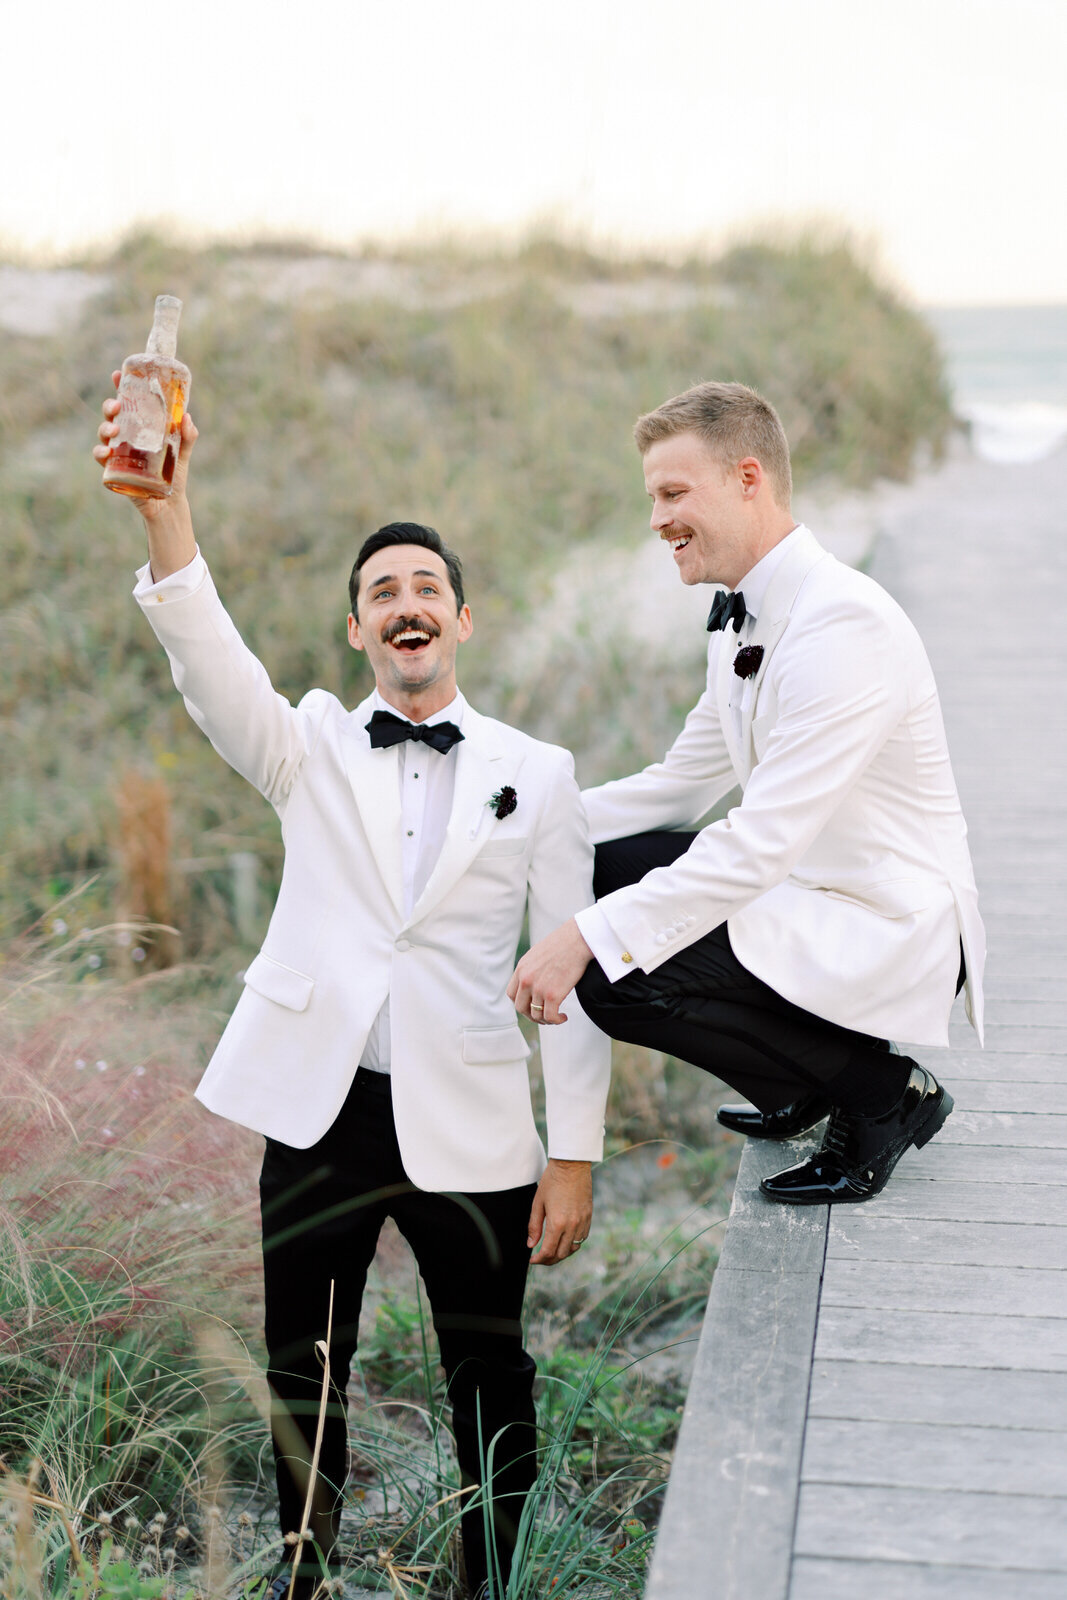 Stylish Oceanside Wedding for a Gay Couple 24